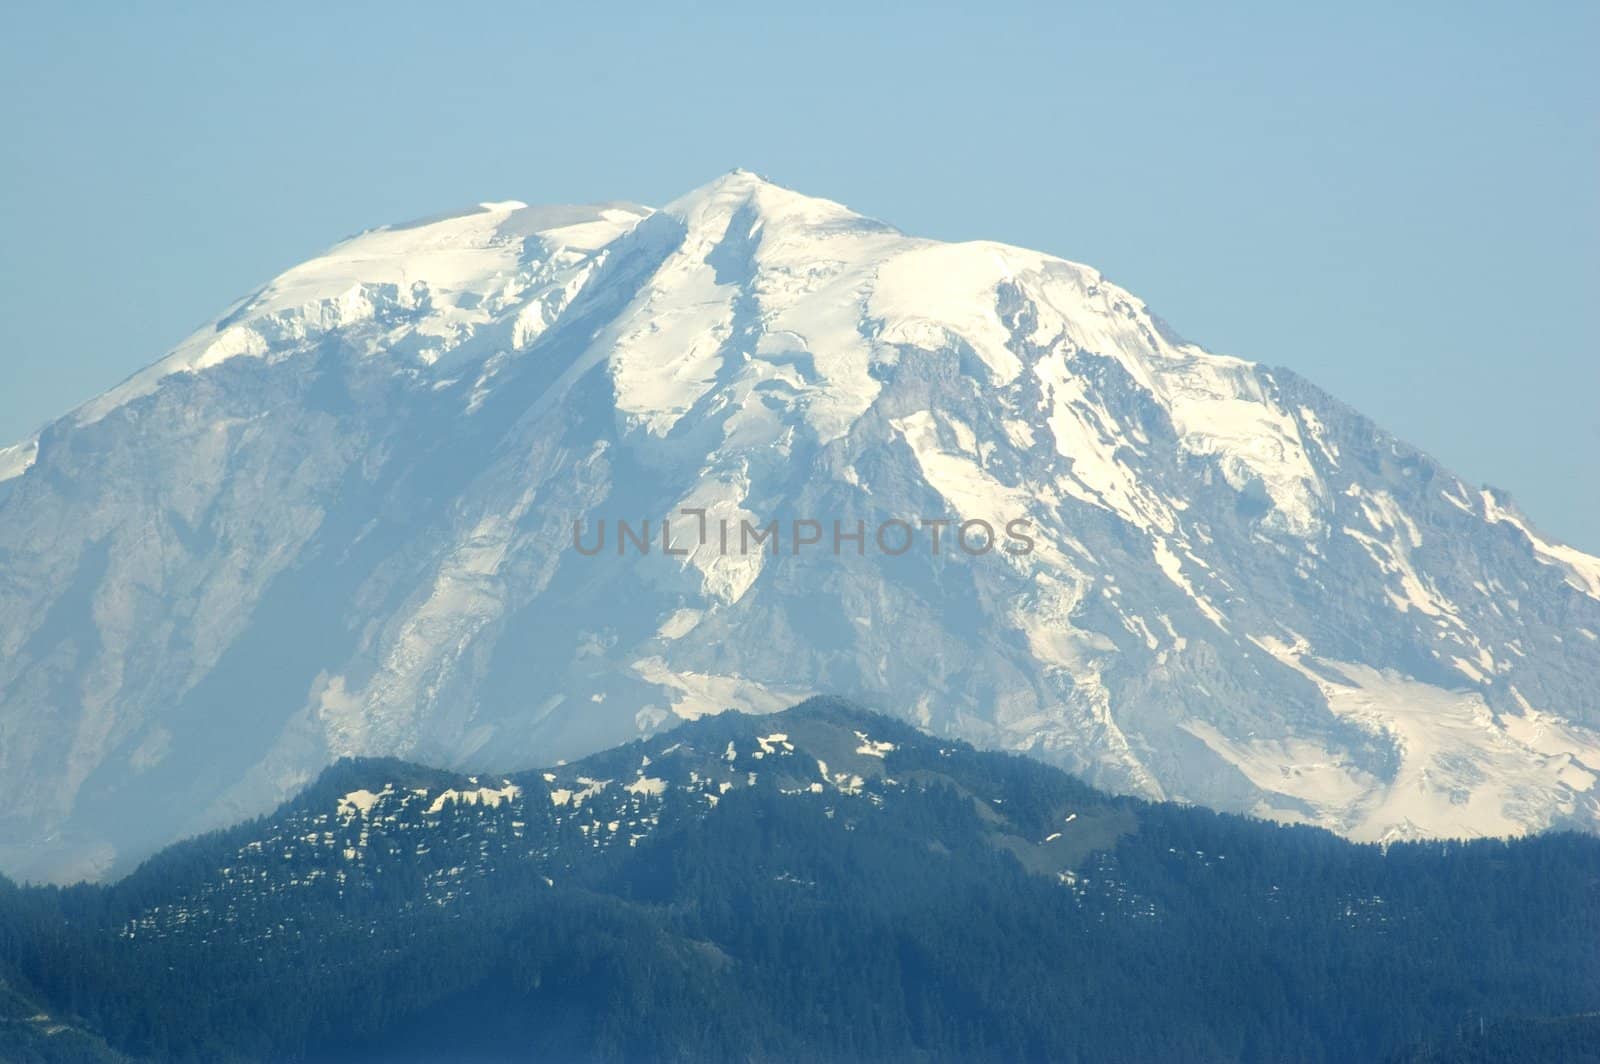 The peak of Mount Rainier from approximately 50 miles away.